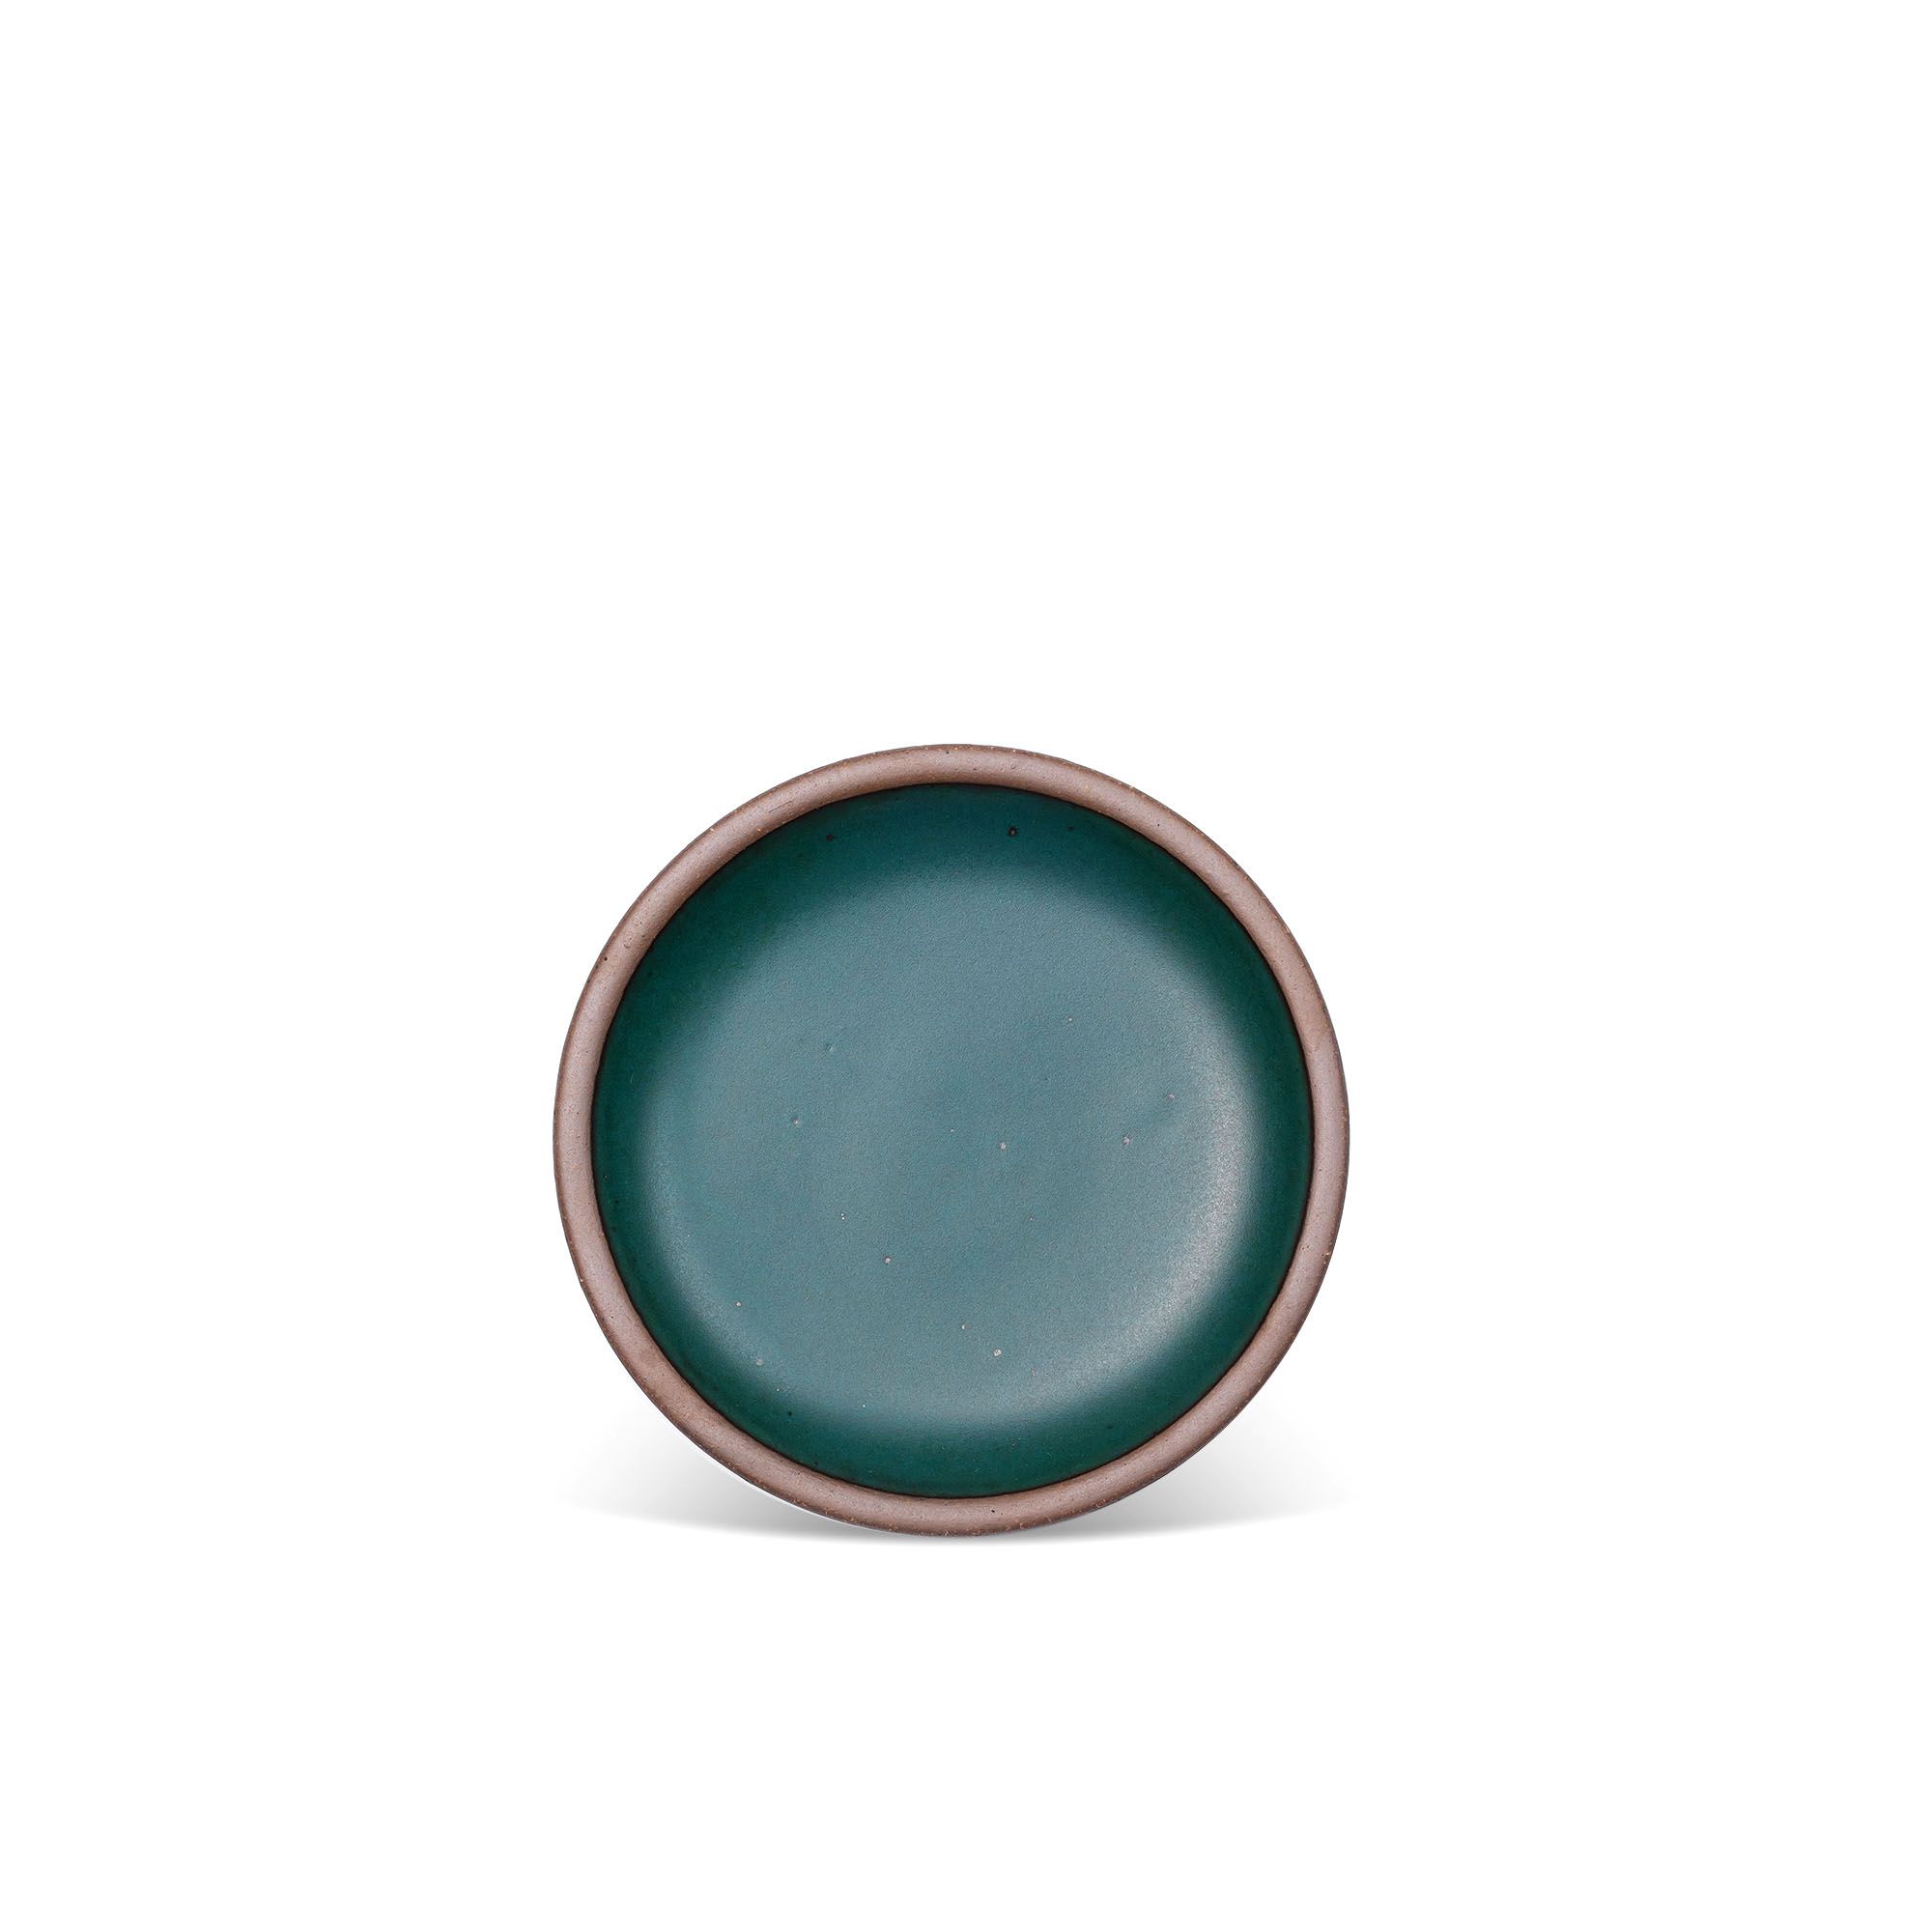 A dessert sized ceramic plate in a deep dark teal color featuring iron speckles and an unglazed rim